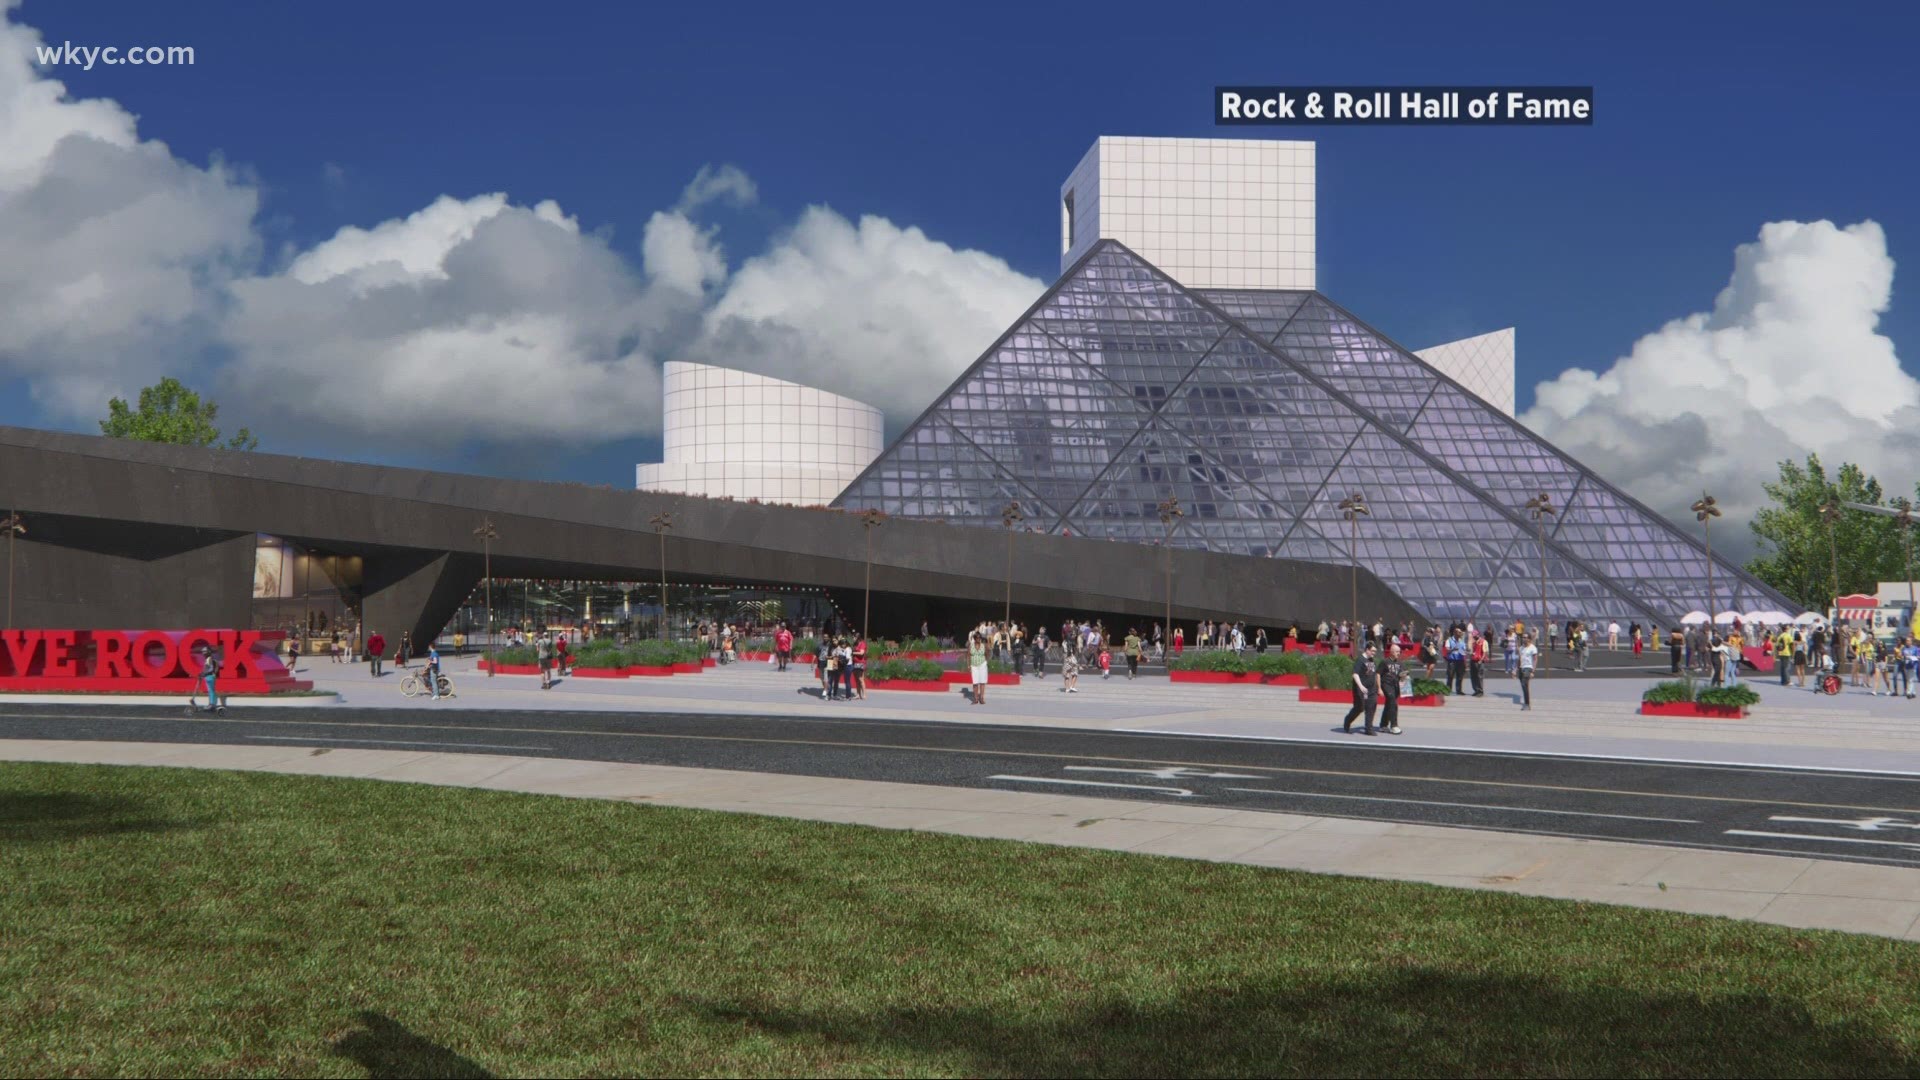 Rock & Roll Hall of Fame reveals expansion plans